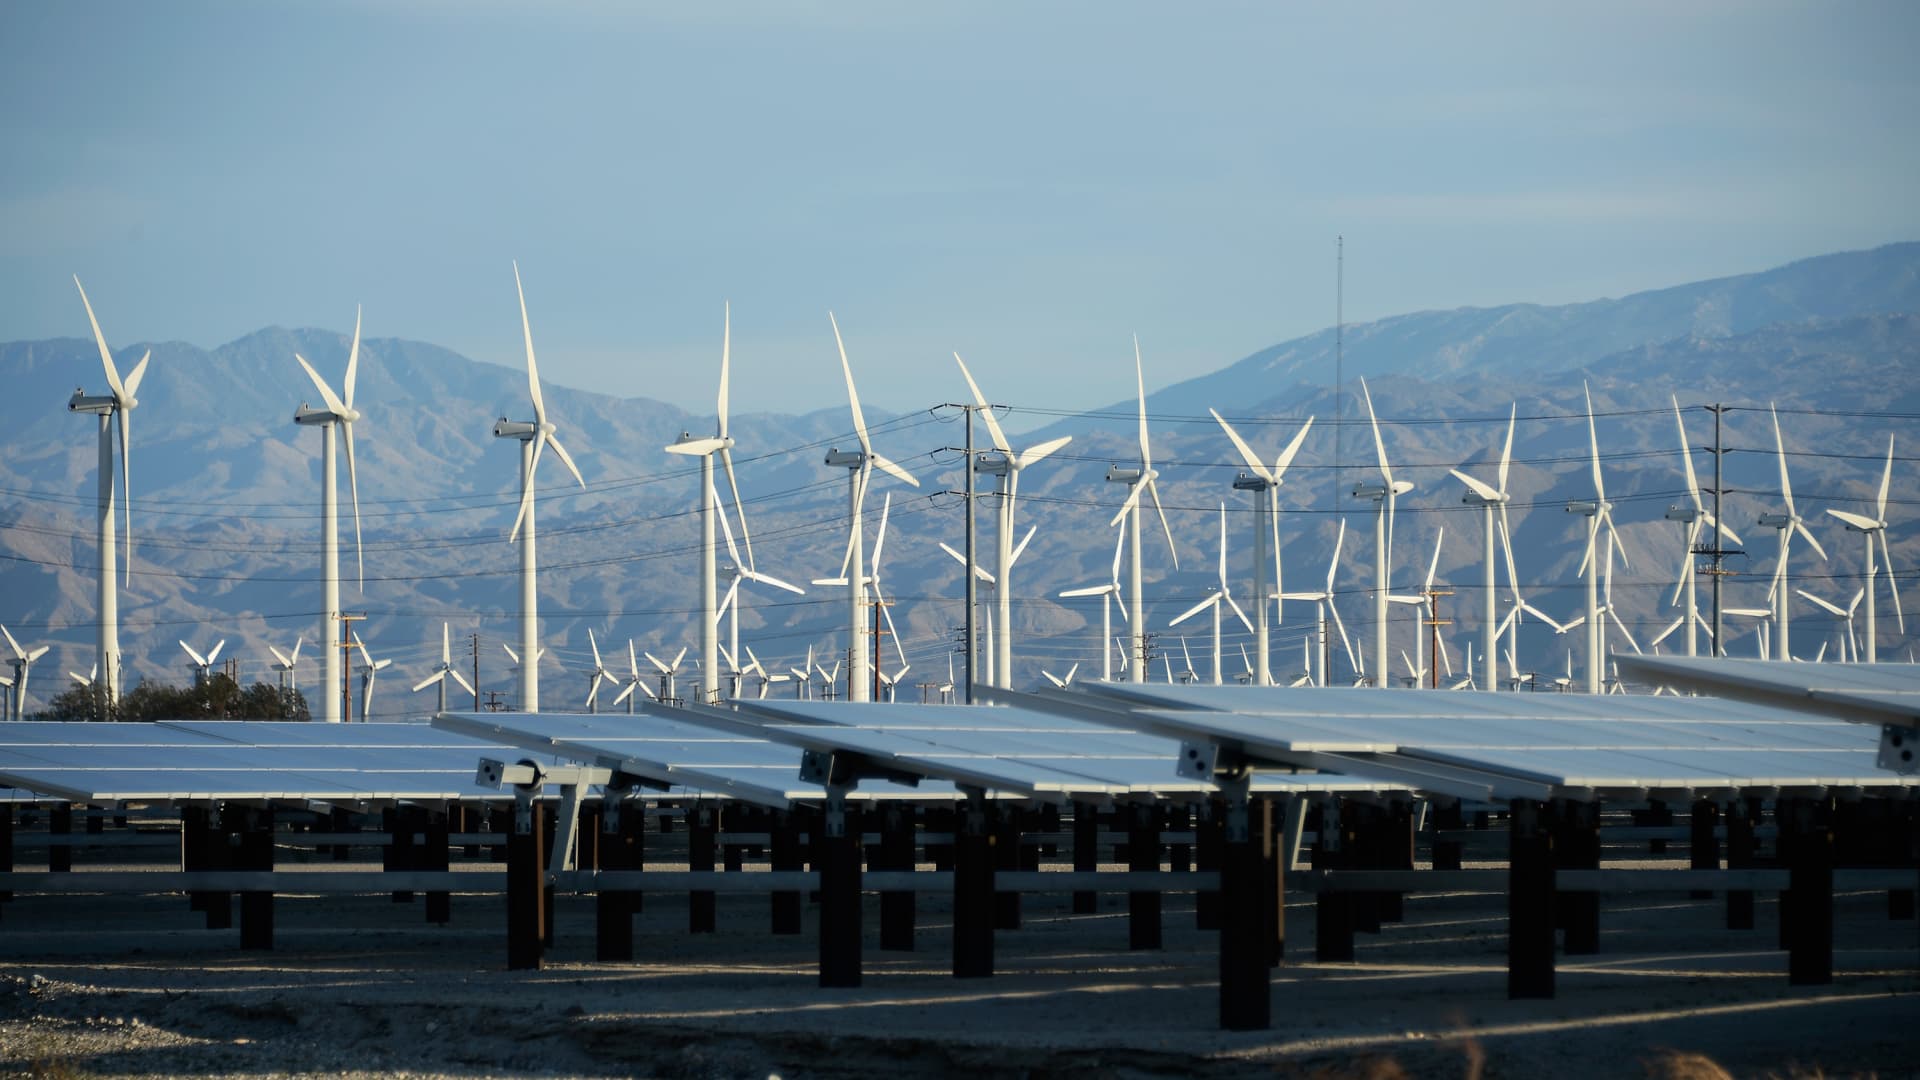 PALM SPRINGS, CA - MARCH 27:Giant wind turbines are powered by strong winds in front of solar panels on March 27, 2013 in Palm Springs, California. According to reports, California continues to lead the nation in green technology and has the lowest greenhouse gas emissions per capita, even with a growing economy and population.(Photo by Kevork Djansezian/Getty Images)